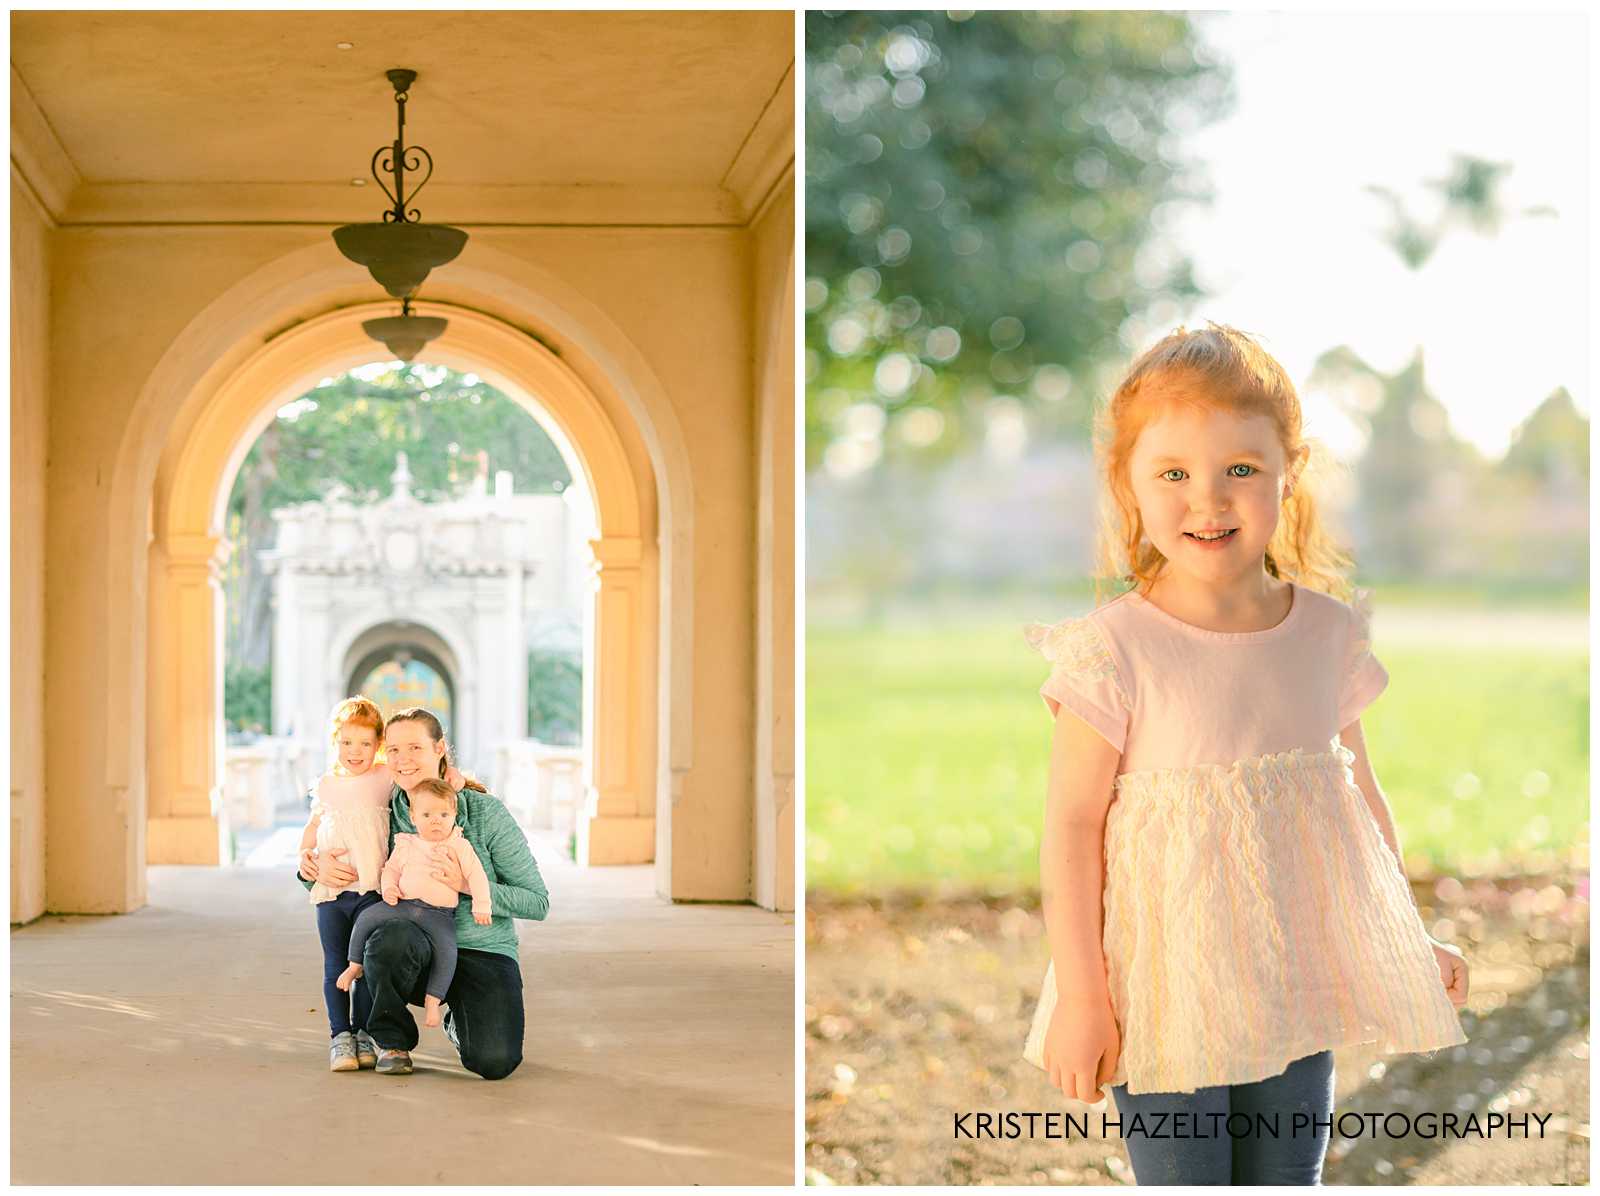 Portraits of Mom and daughters under an architectural arch